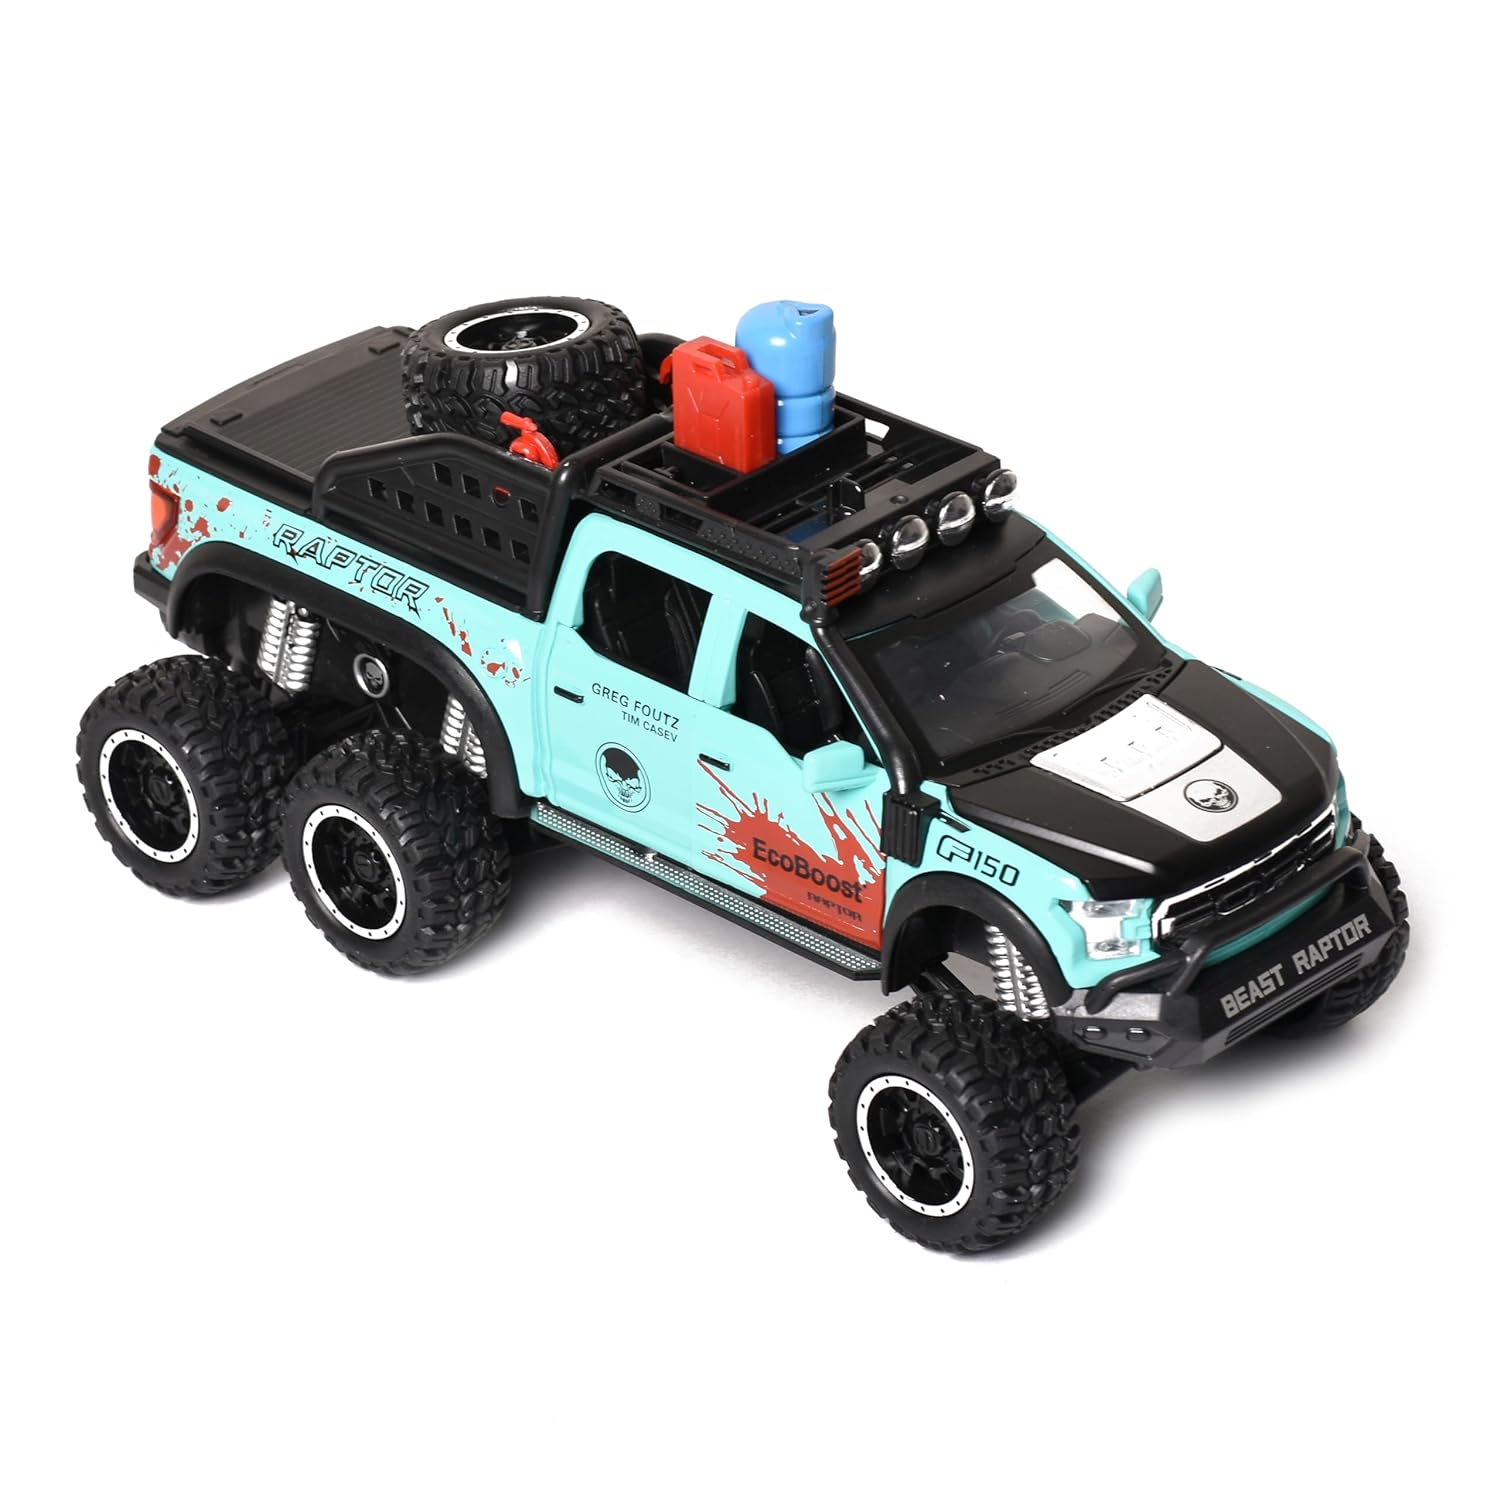 Braintastic F150 Raptor Diecast Spray Metal Model Pickup Car Truck with Doors Open Sound and Light for Kids Age 3+ Year